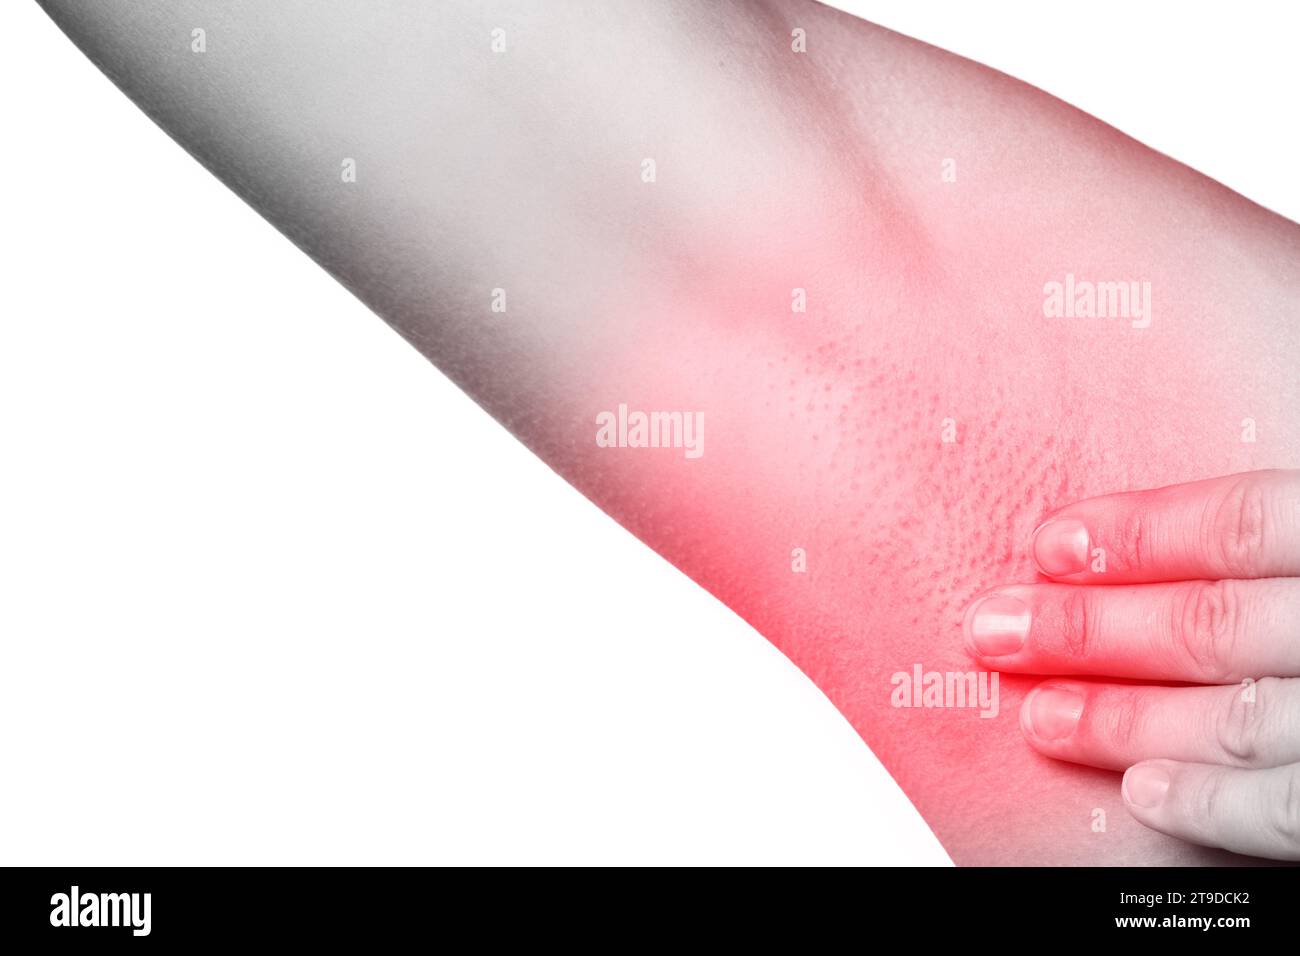 Closeup of female armpit with redness. Skin irritation or swollen lymph node. Stock Photo